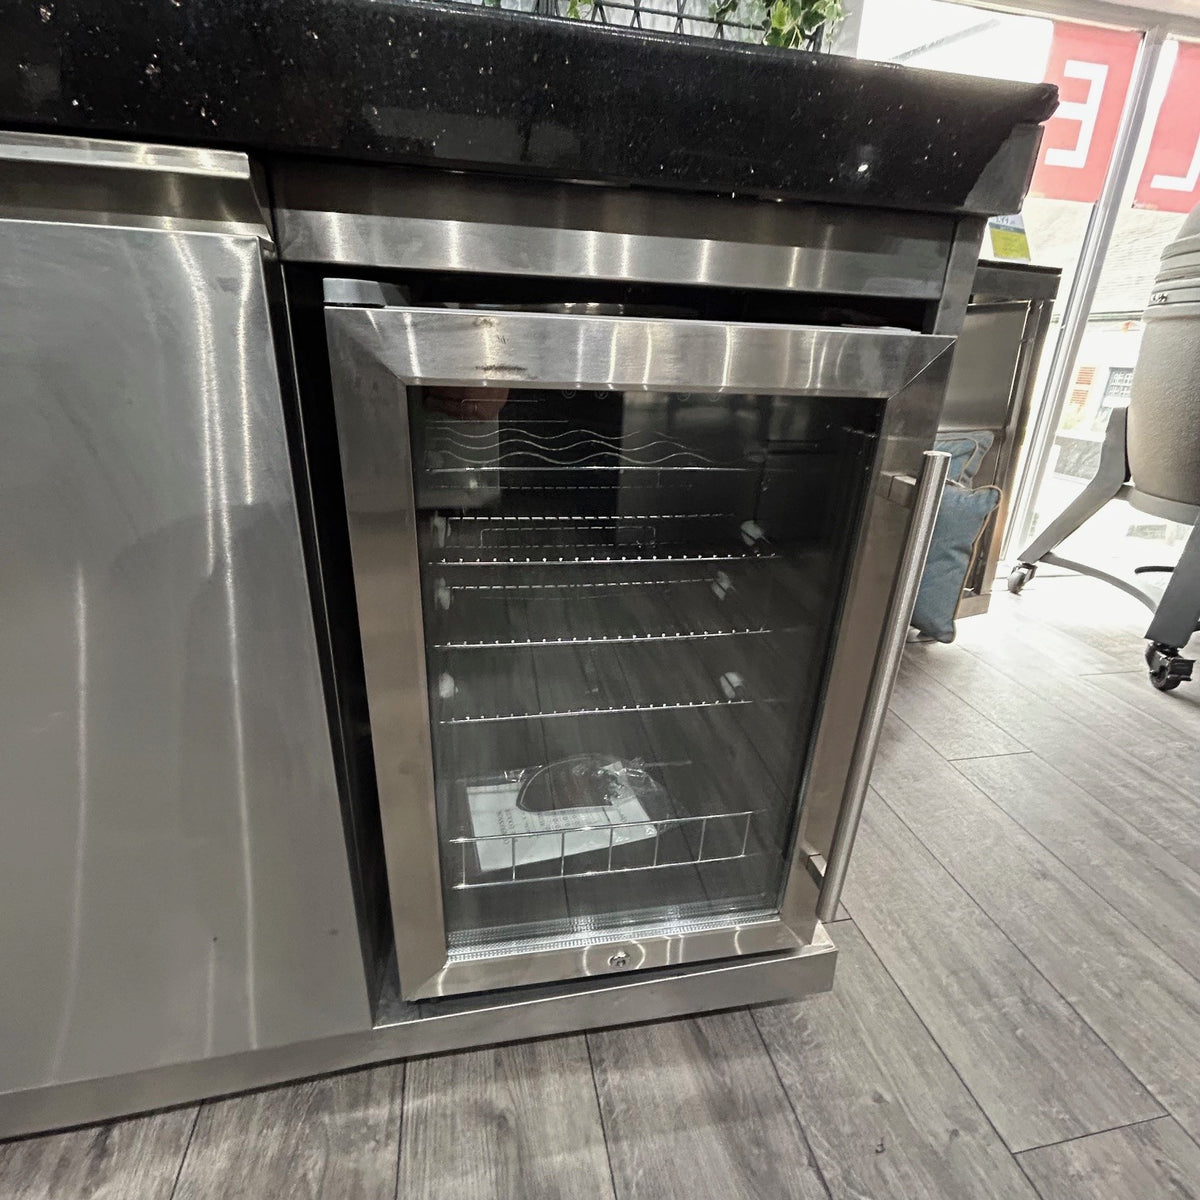 Ex Display Draco Grills 6 Burner Stainless Steel Outdoor Kitchen with Sink and Fridge Unit